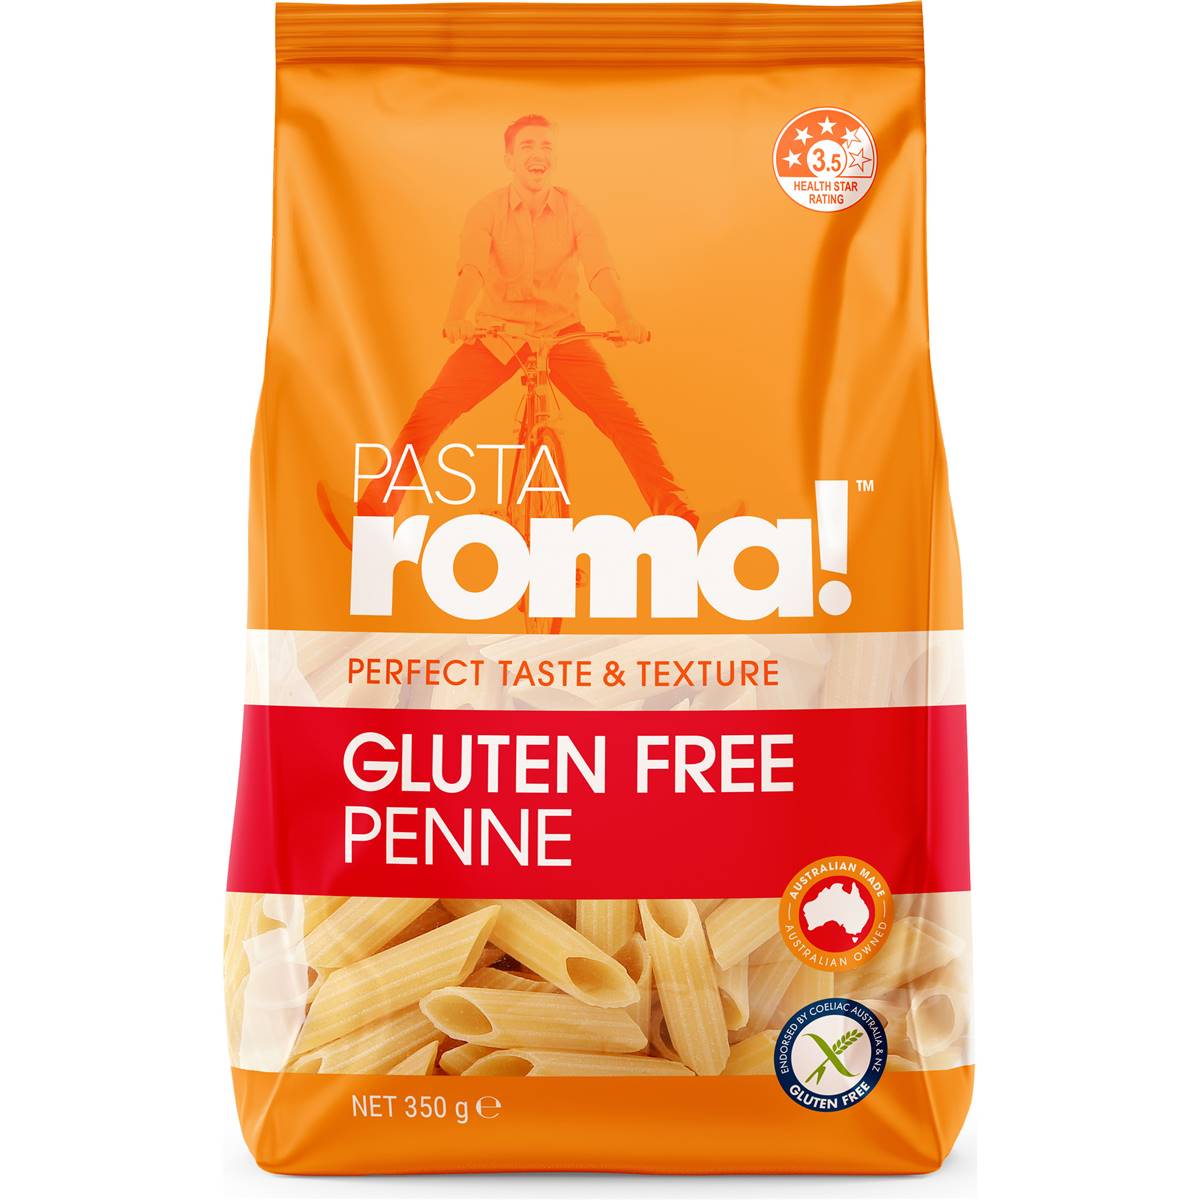 Calories in Pasta Roma Gluten Free Penne